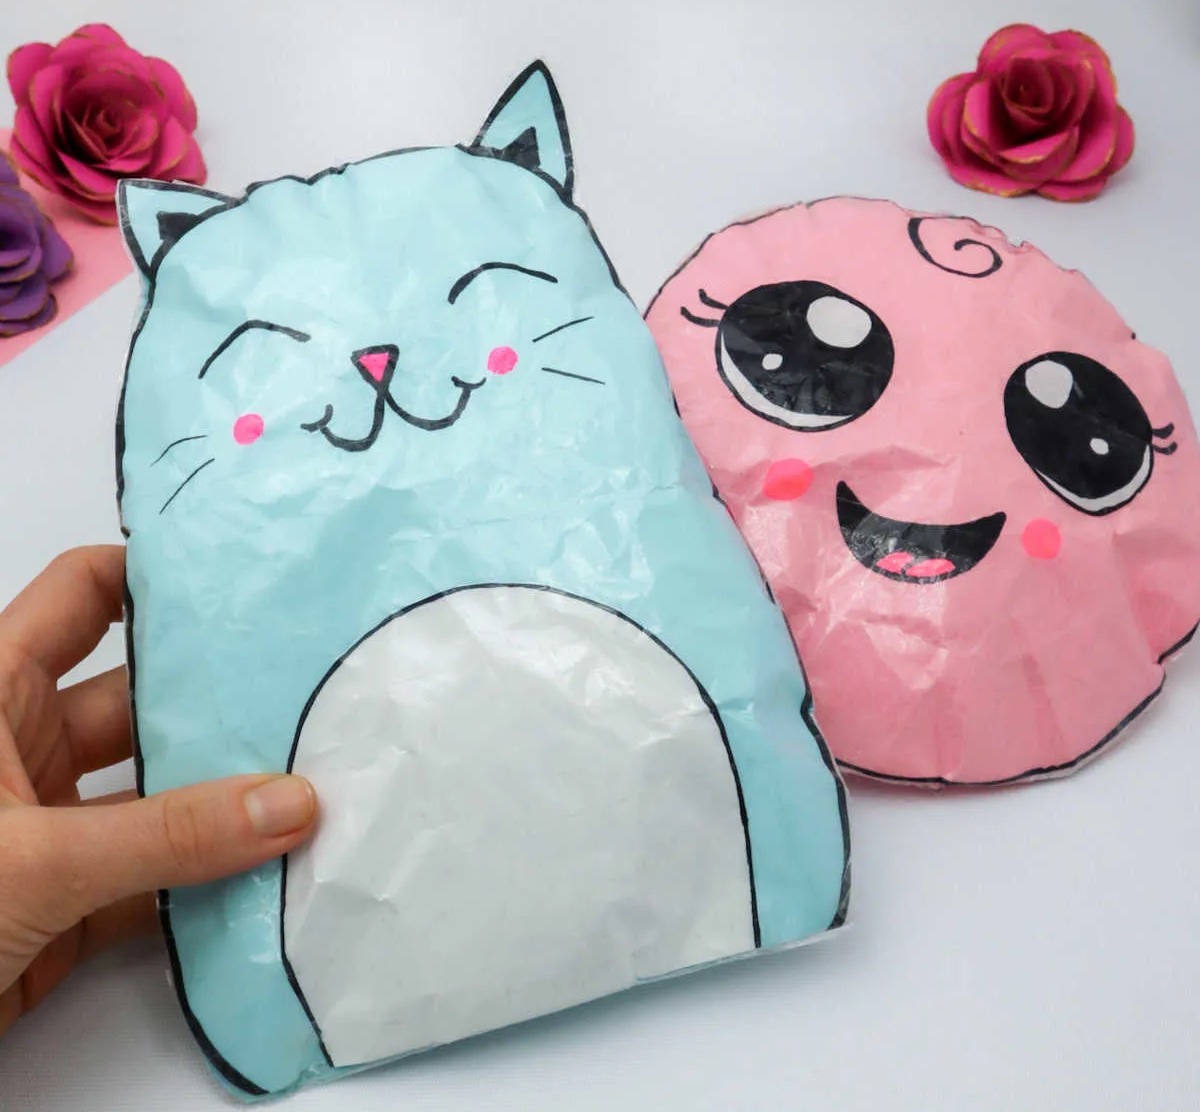 How to Make Paper Squishies (Step-by-step Tutorial)